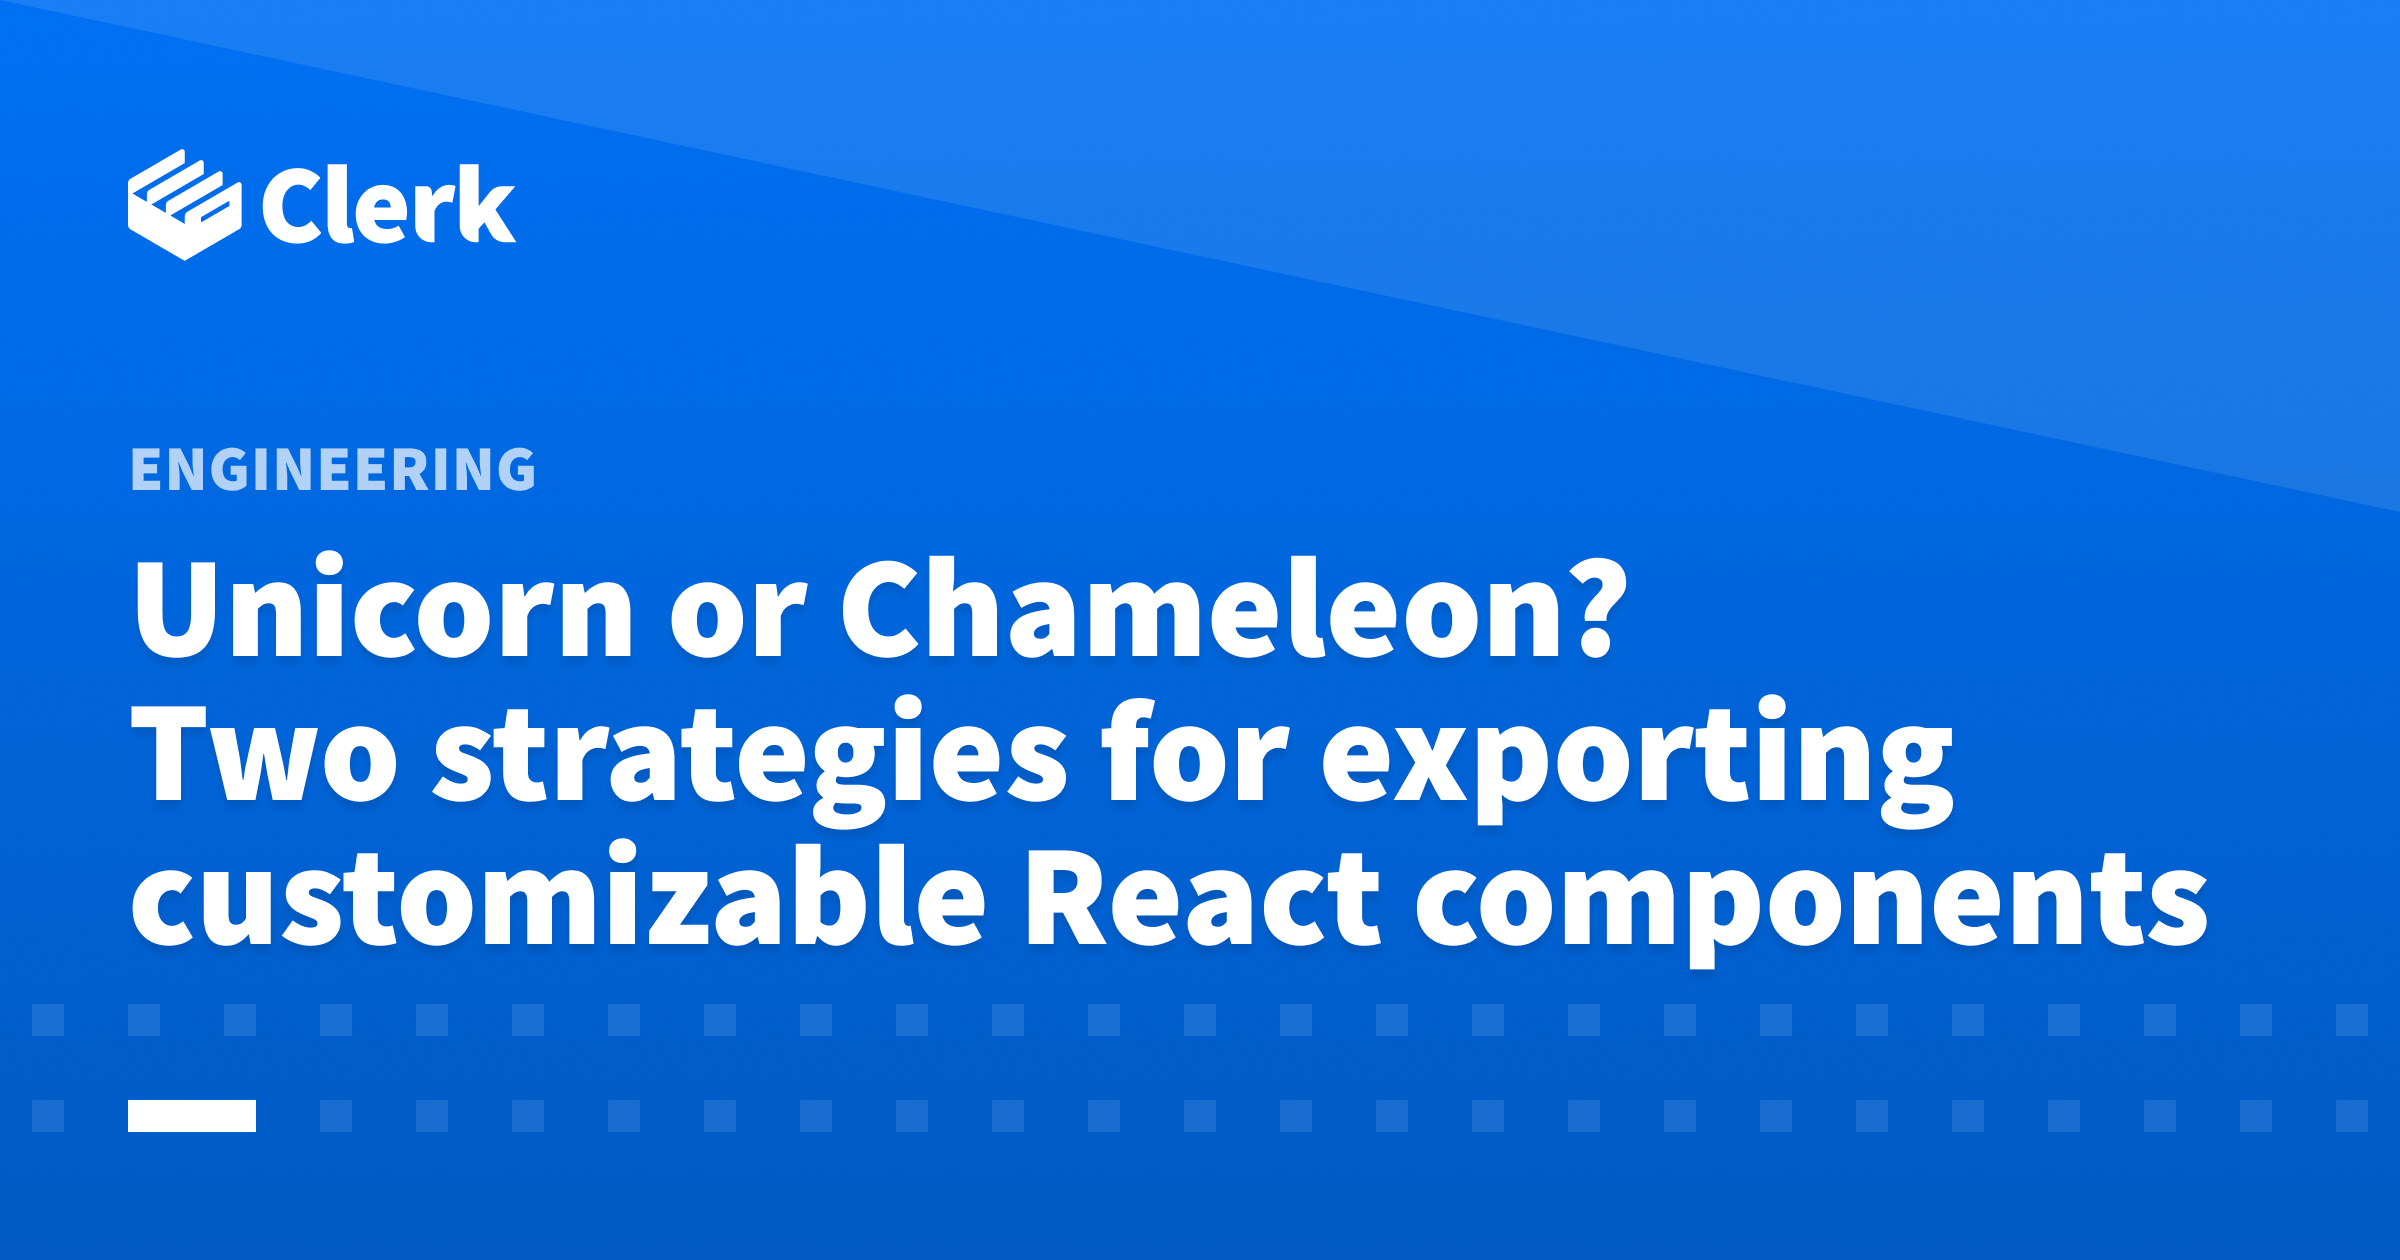 Unicorn or Chameleon? Two strategies for exporting customizable React components